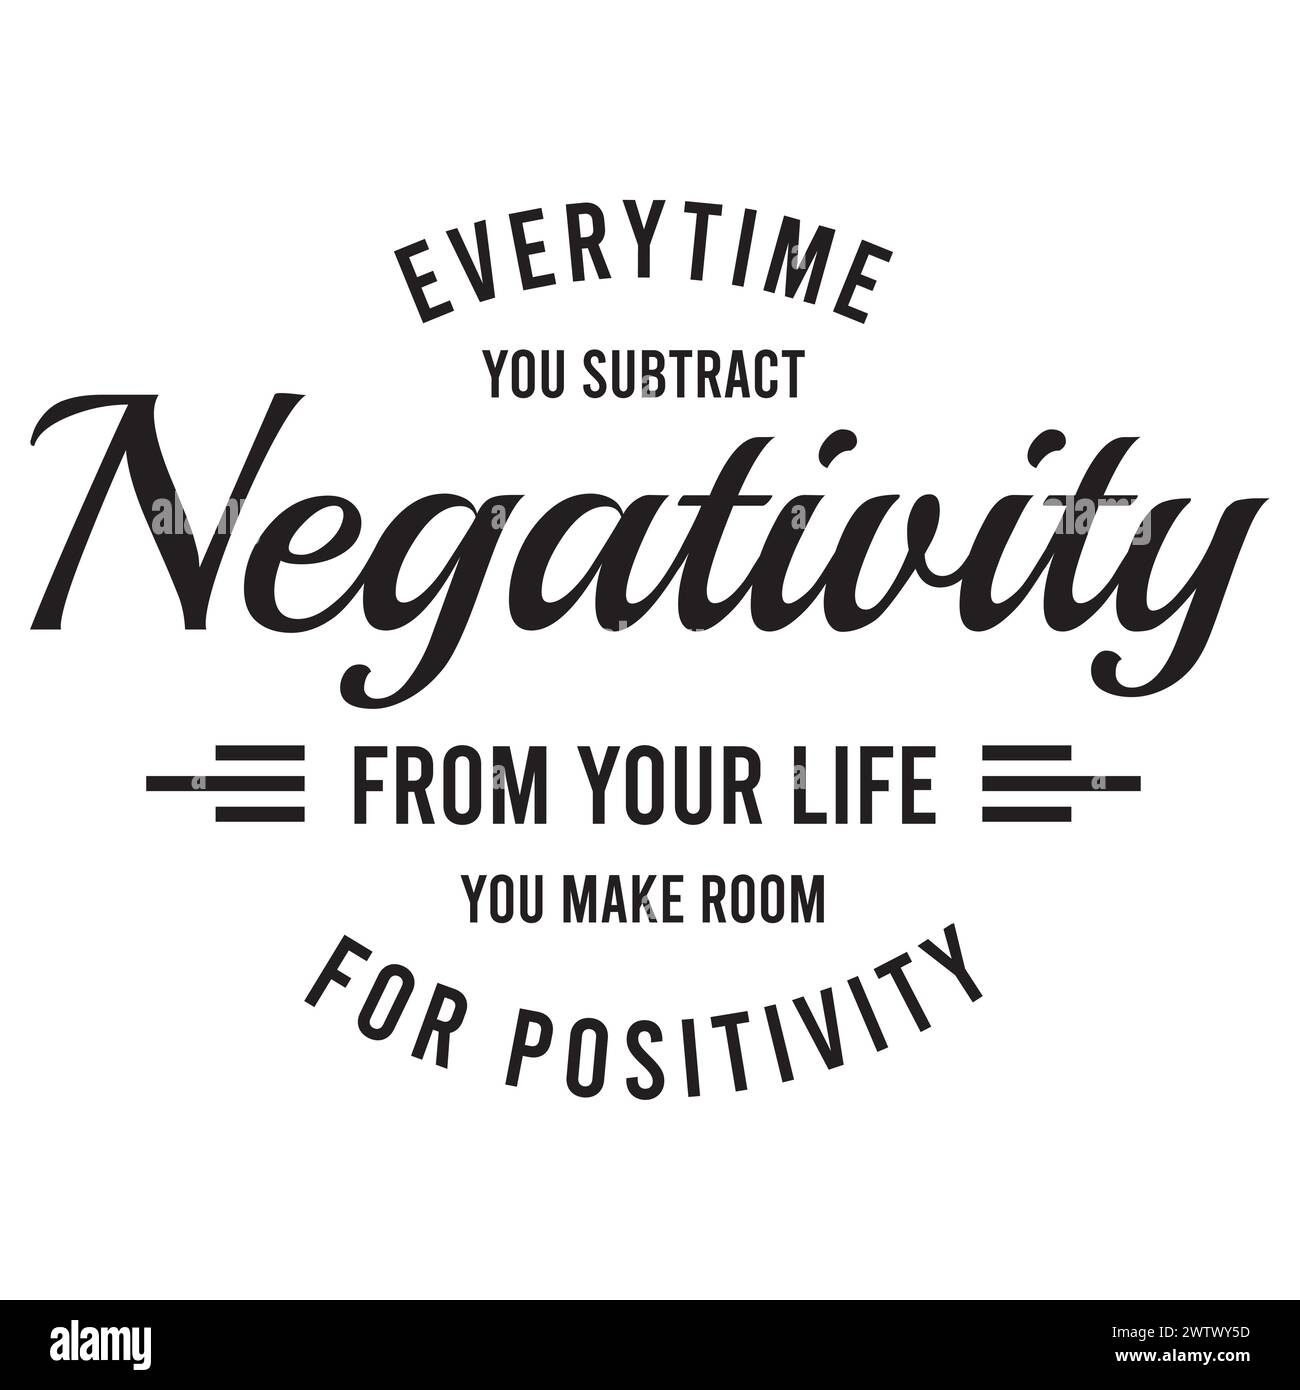 everytime you subtract negativity from your life you make room for positivity inspirational quotes motivational typography lettering Stock Vector